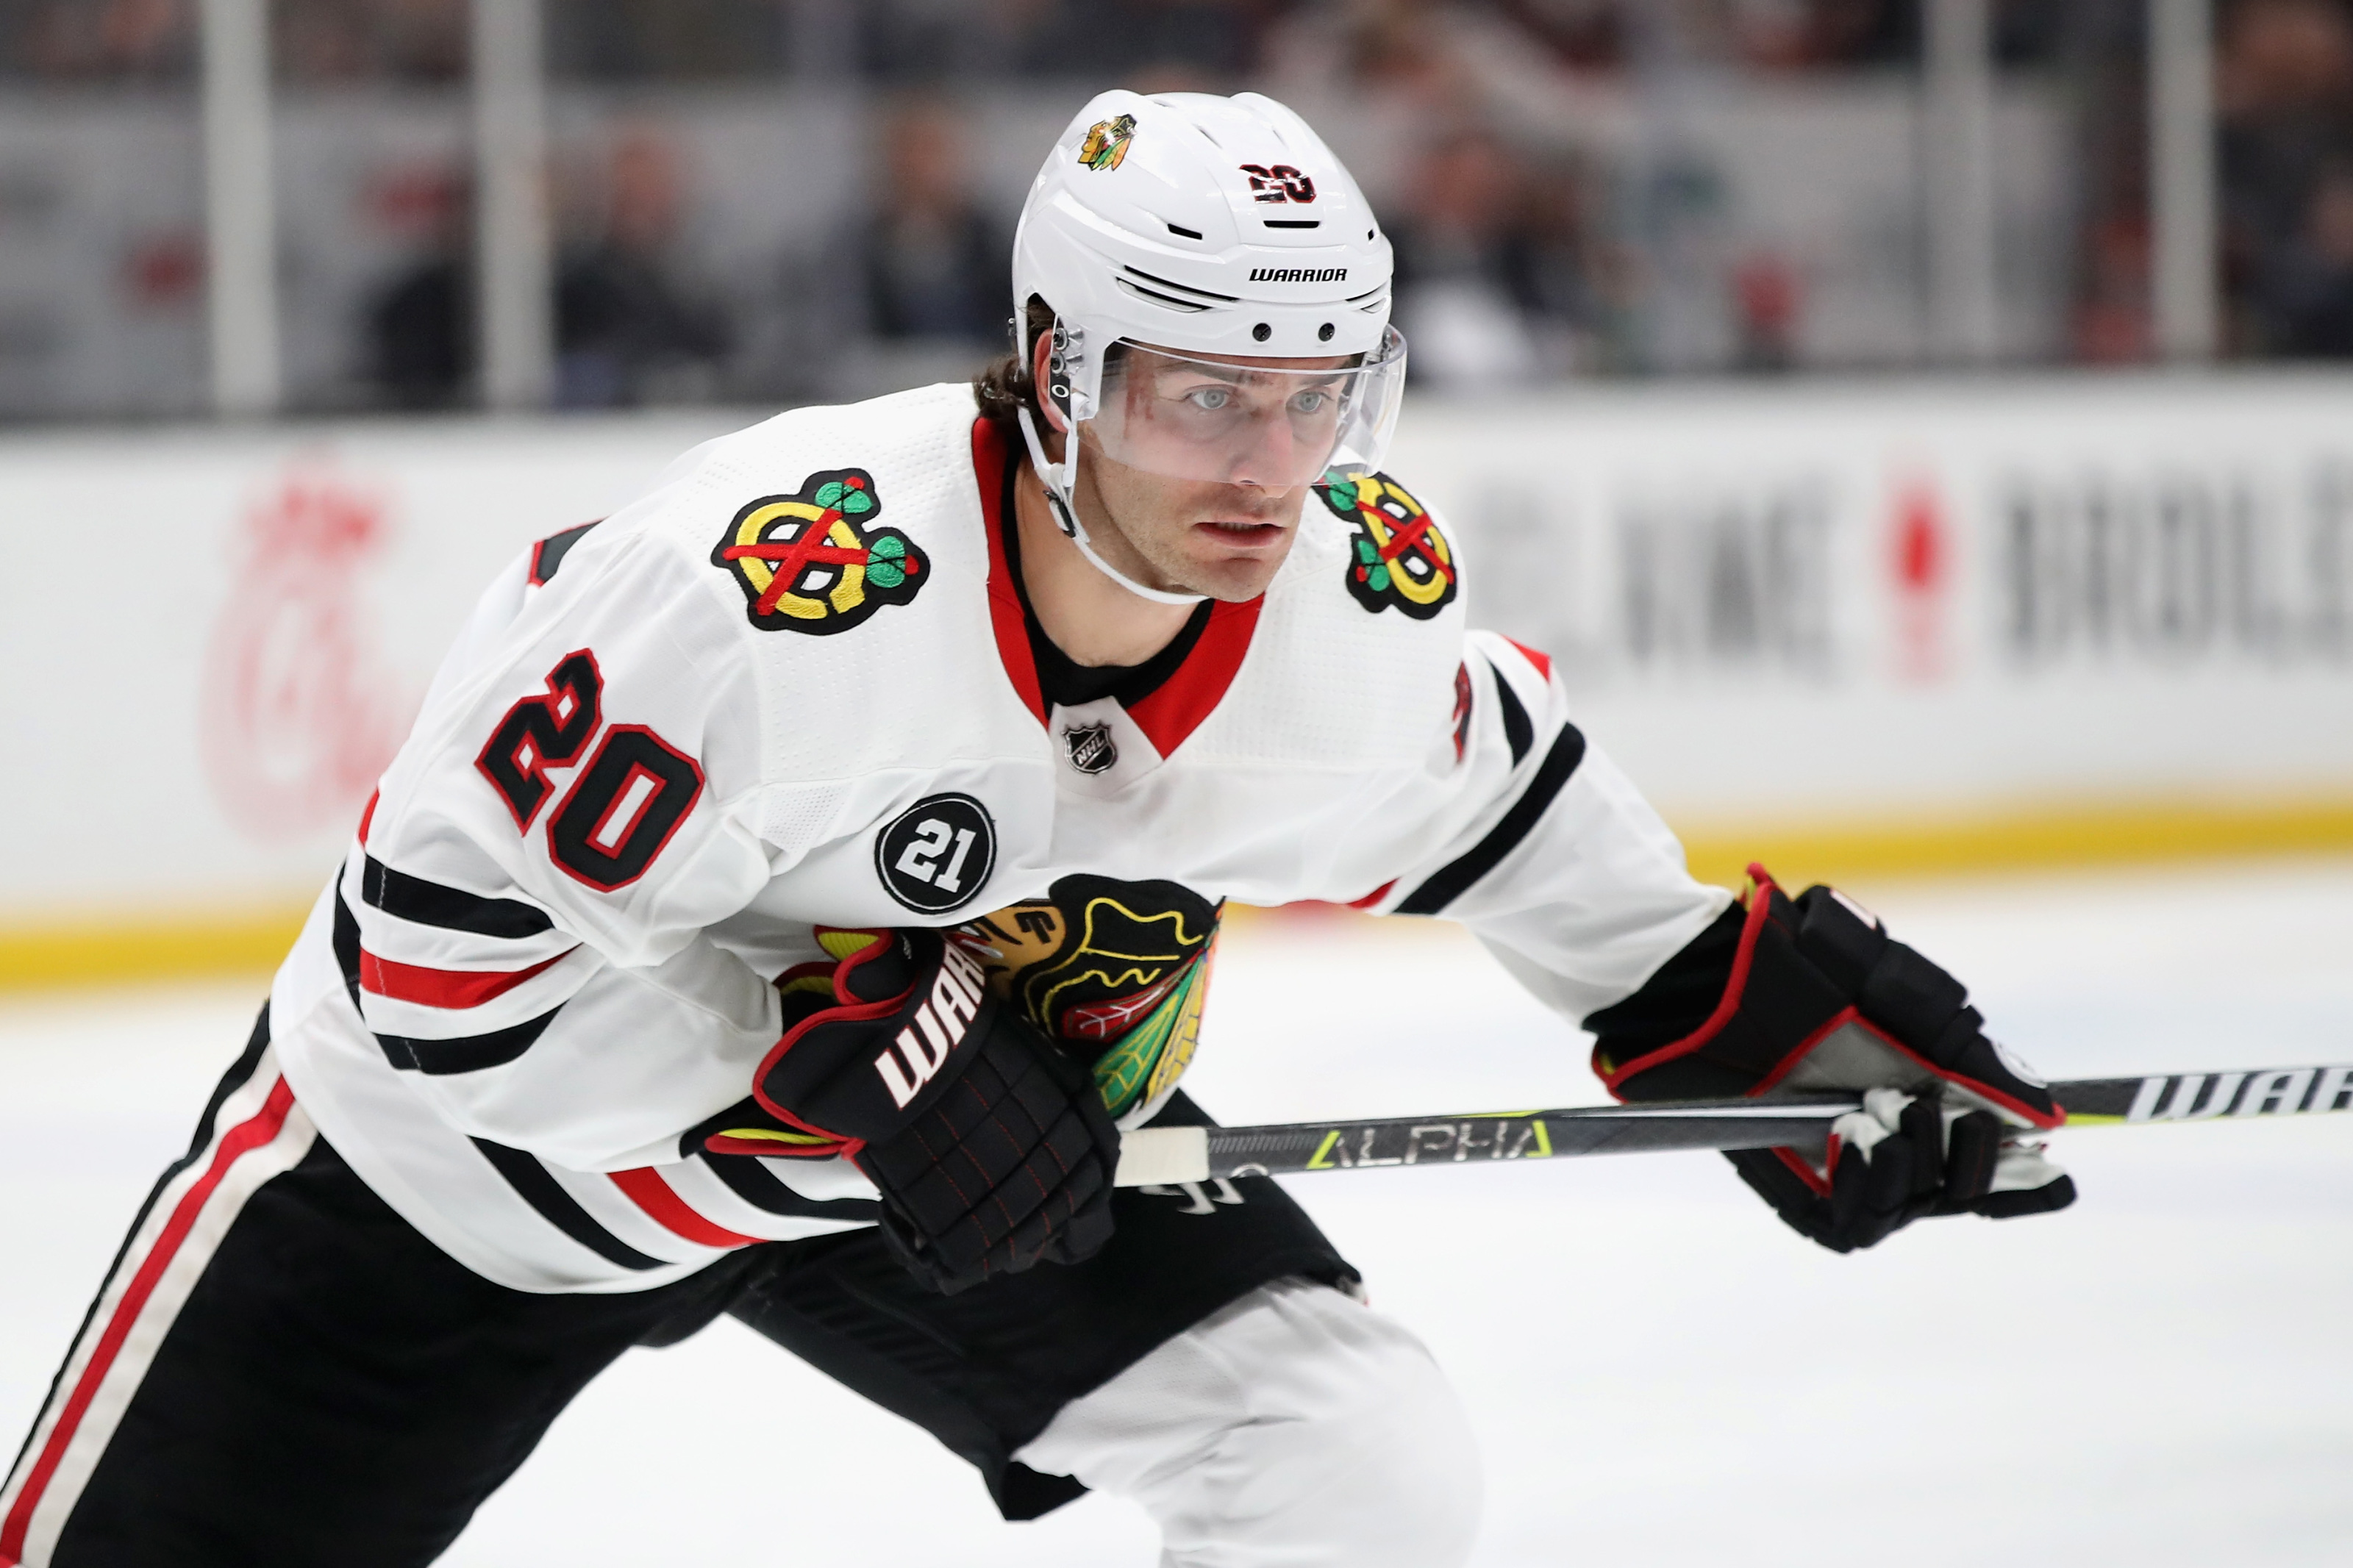 Could Bruins and Blackhawks pull off a deal for Brandon Saad? - The Athletic